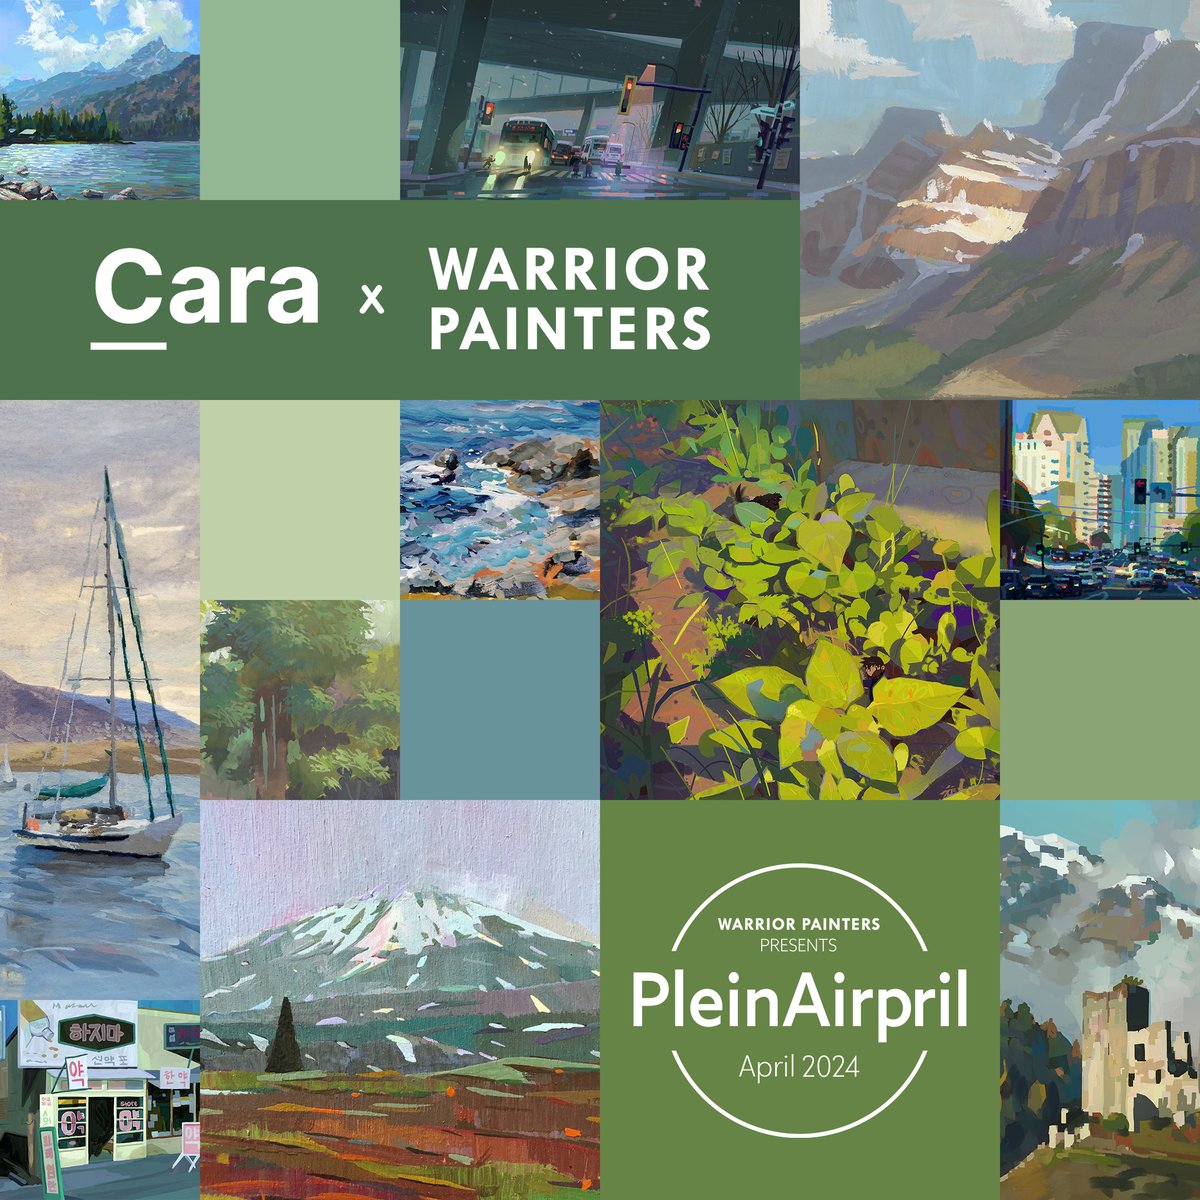 Excited to see everyone on @Cara_HQ this #PleinAirpril 🤗